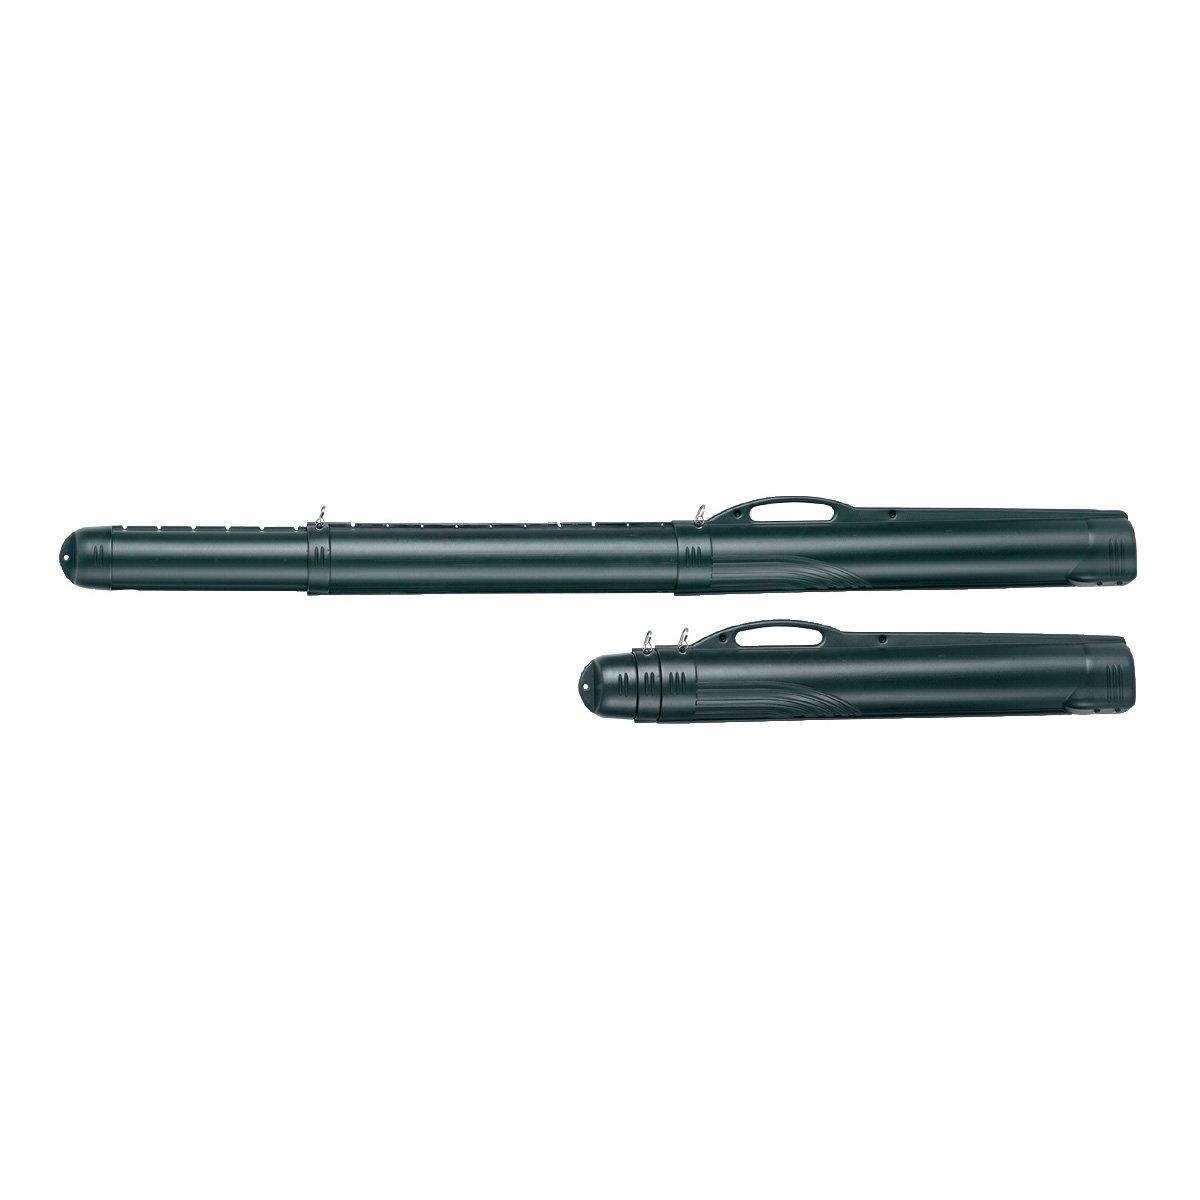 Plano Airliner Rod Case